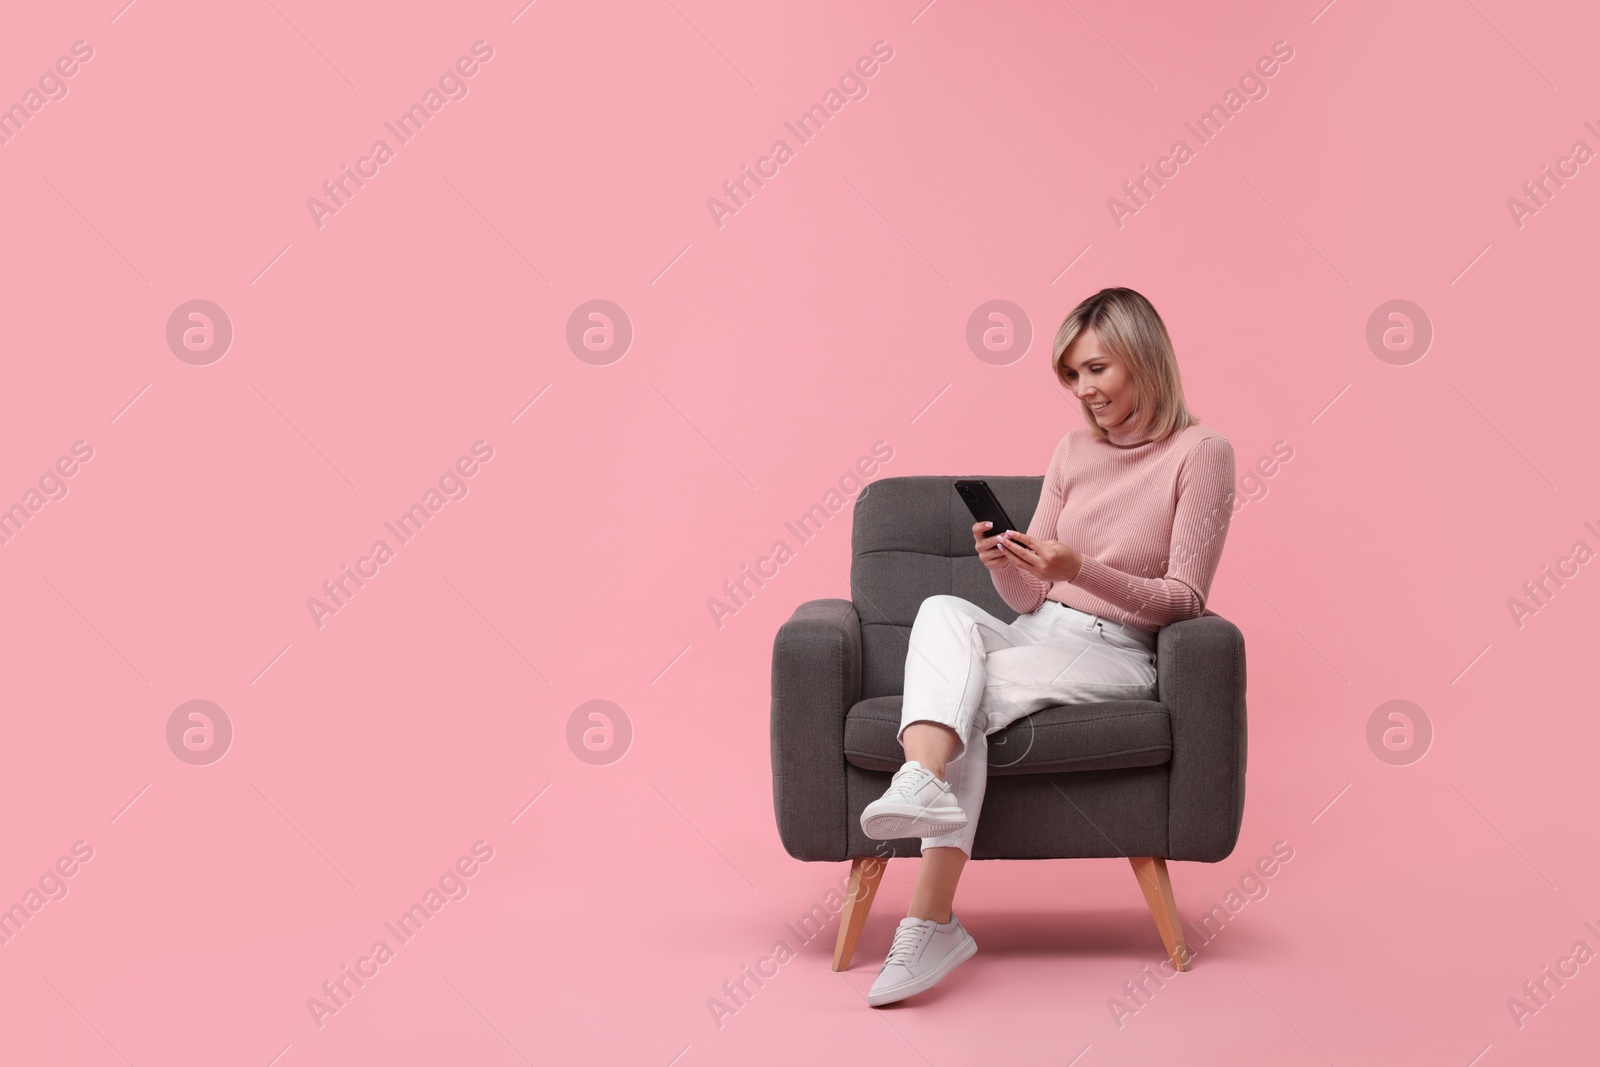 Photo of Happy woman with phone on armchair against pink background, space for text